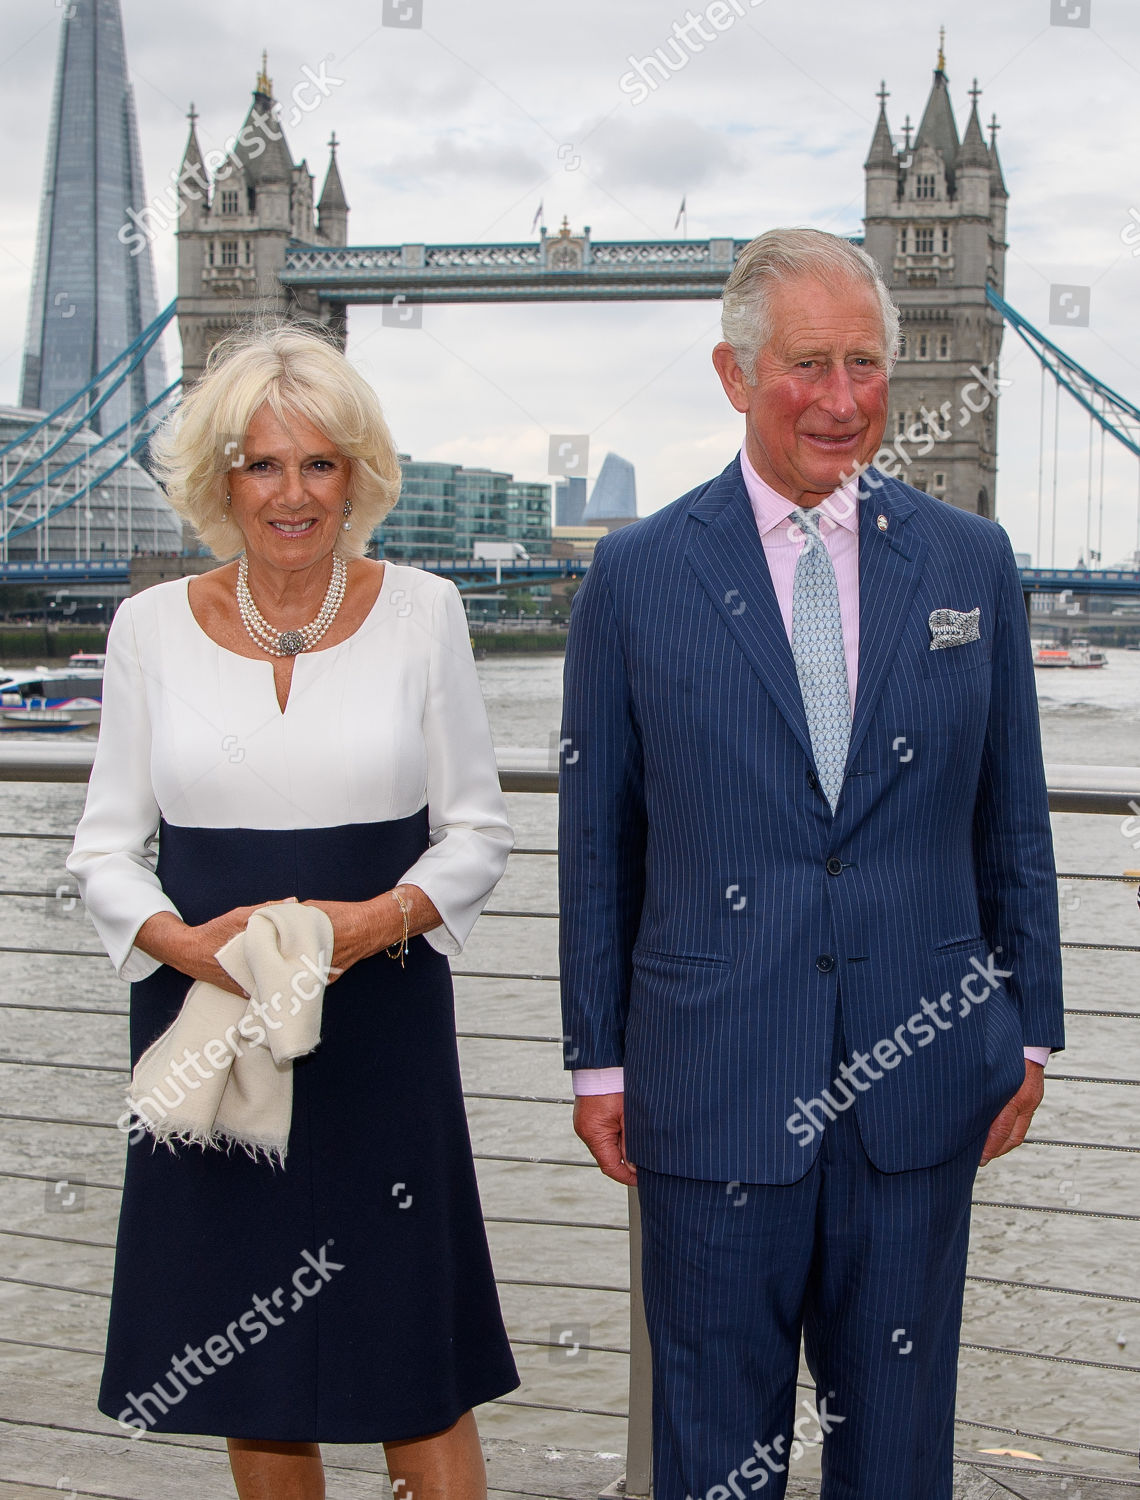 prince-charles-carries-out-royal-engagements-london-uk-shutterstock-editorial-9863246bl.jpg